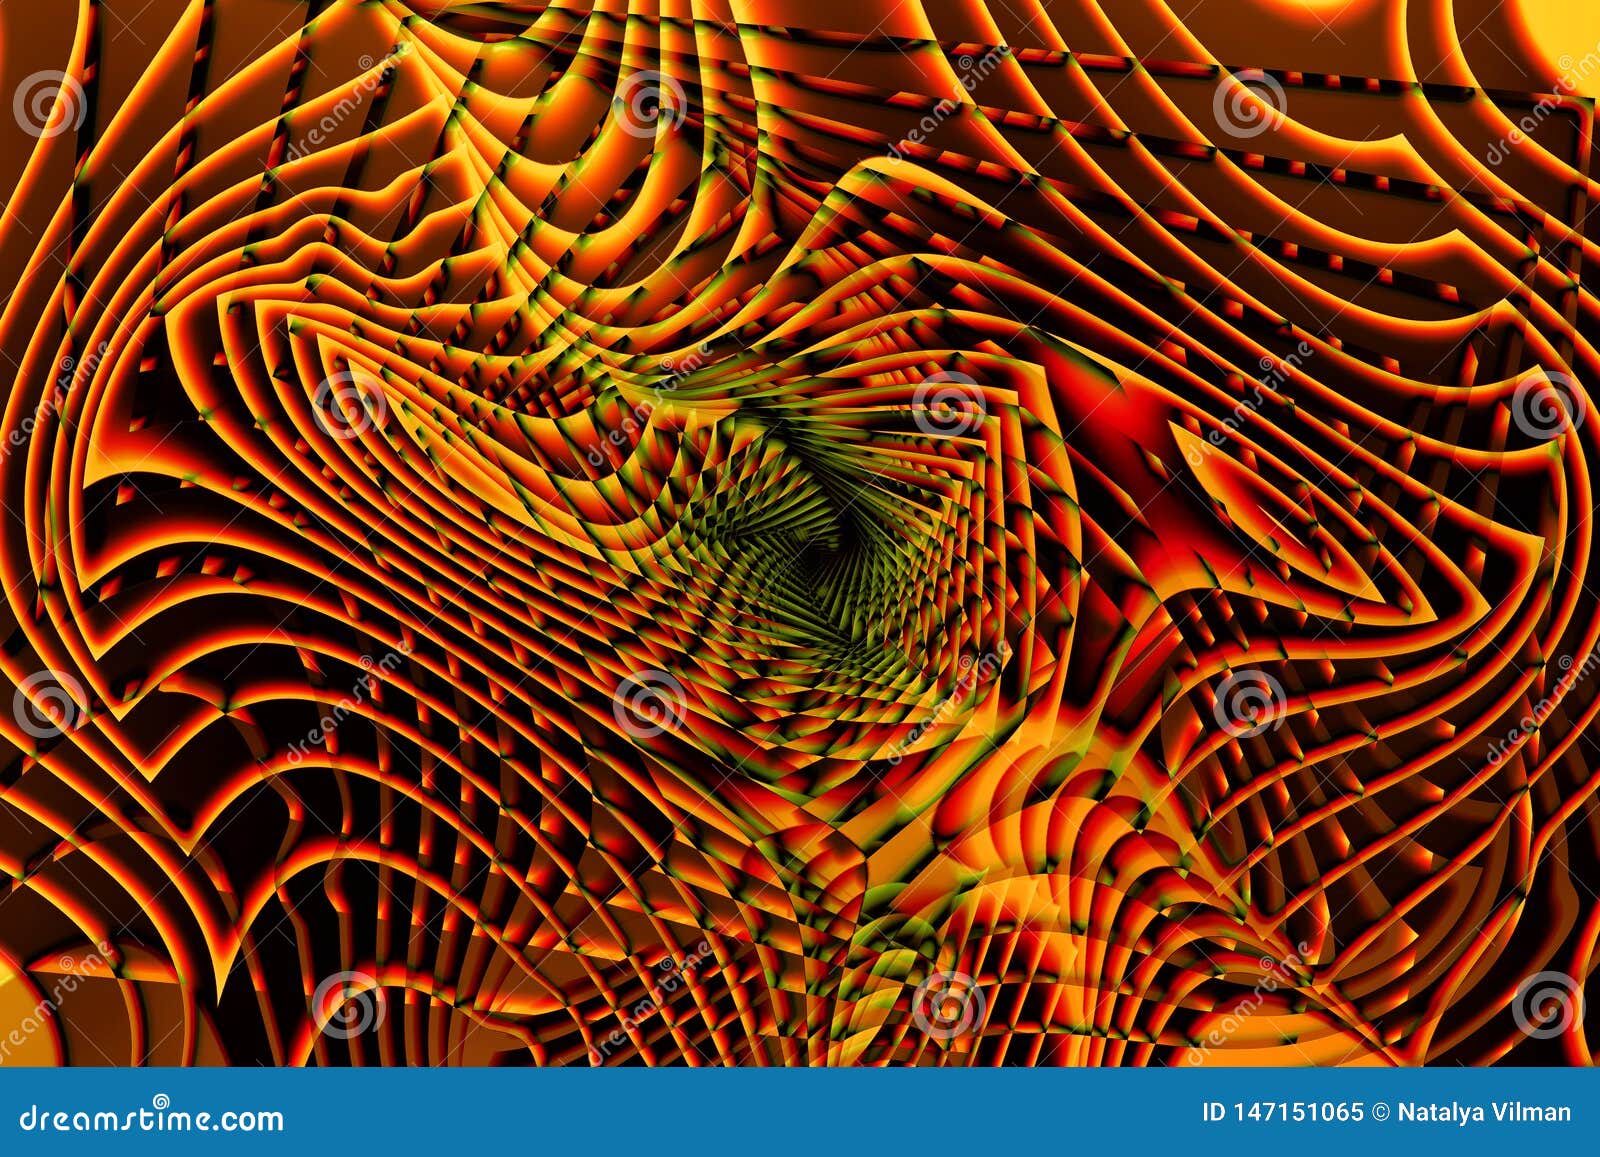 beautiful abstract psychedelic background with fractals in orange color